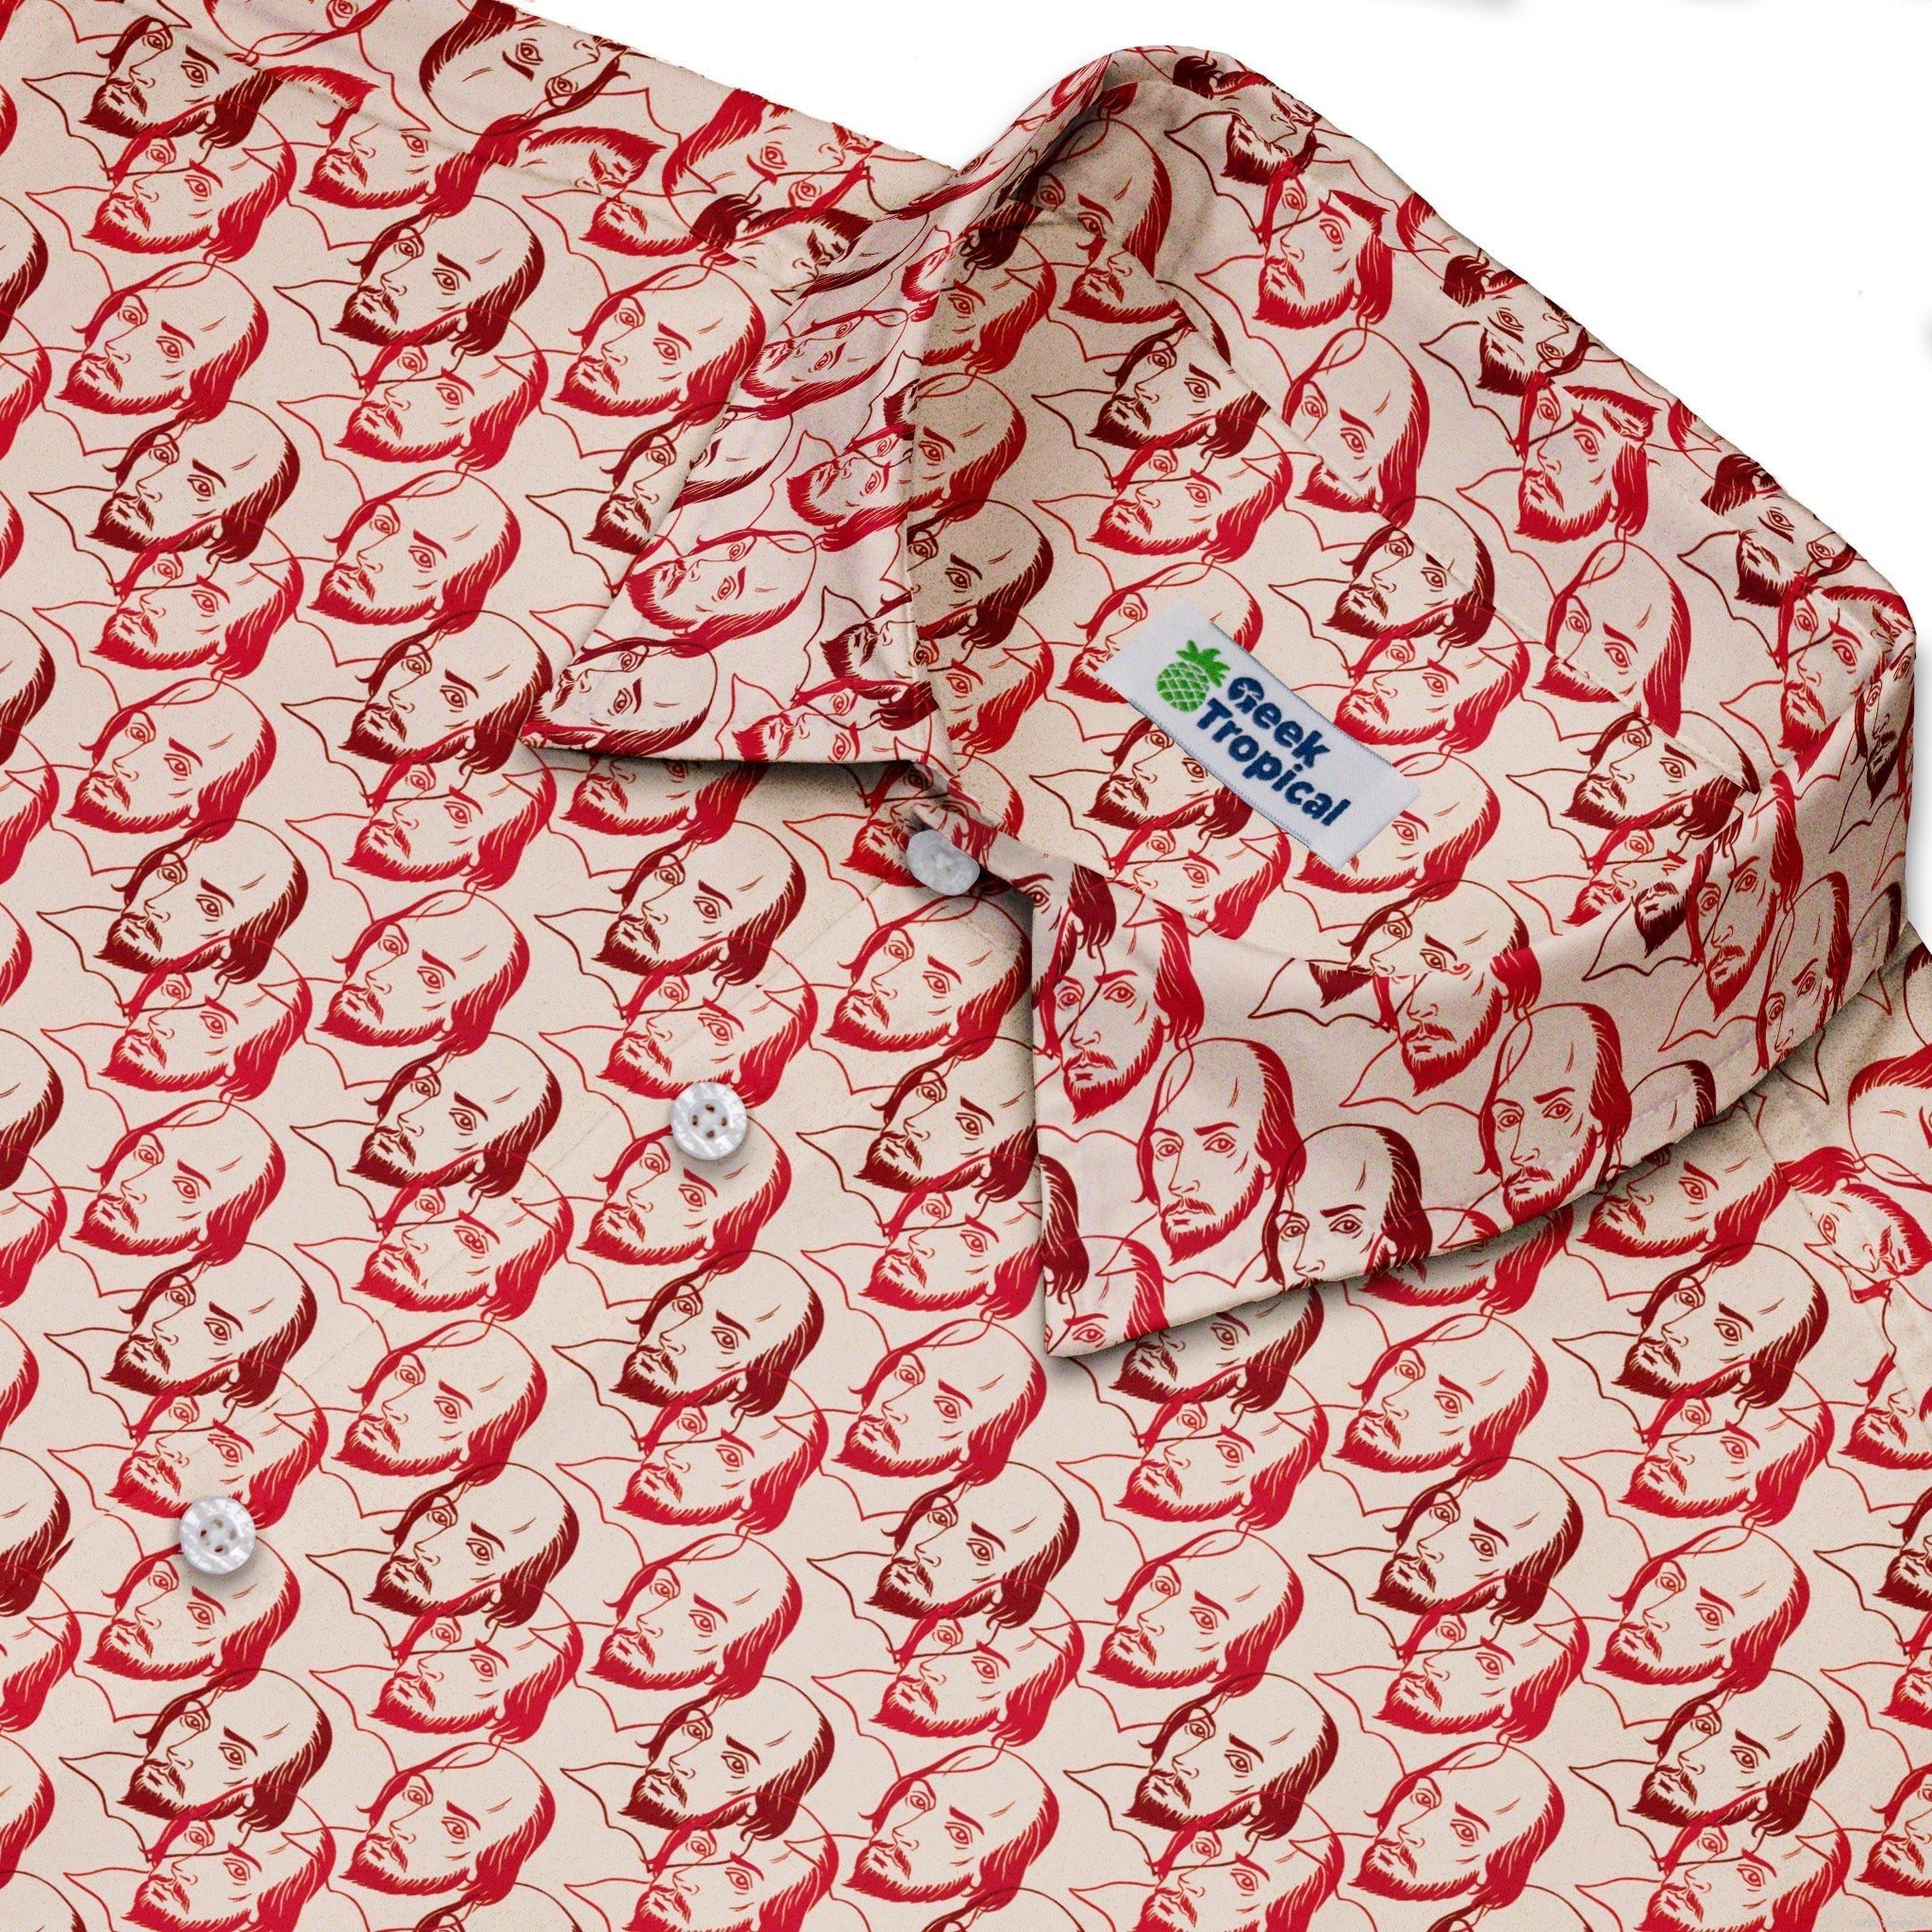 Shakespeare Red Macbeth Button Up Shirt - adult sizing - Book Prints - Simple Patterns